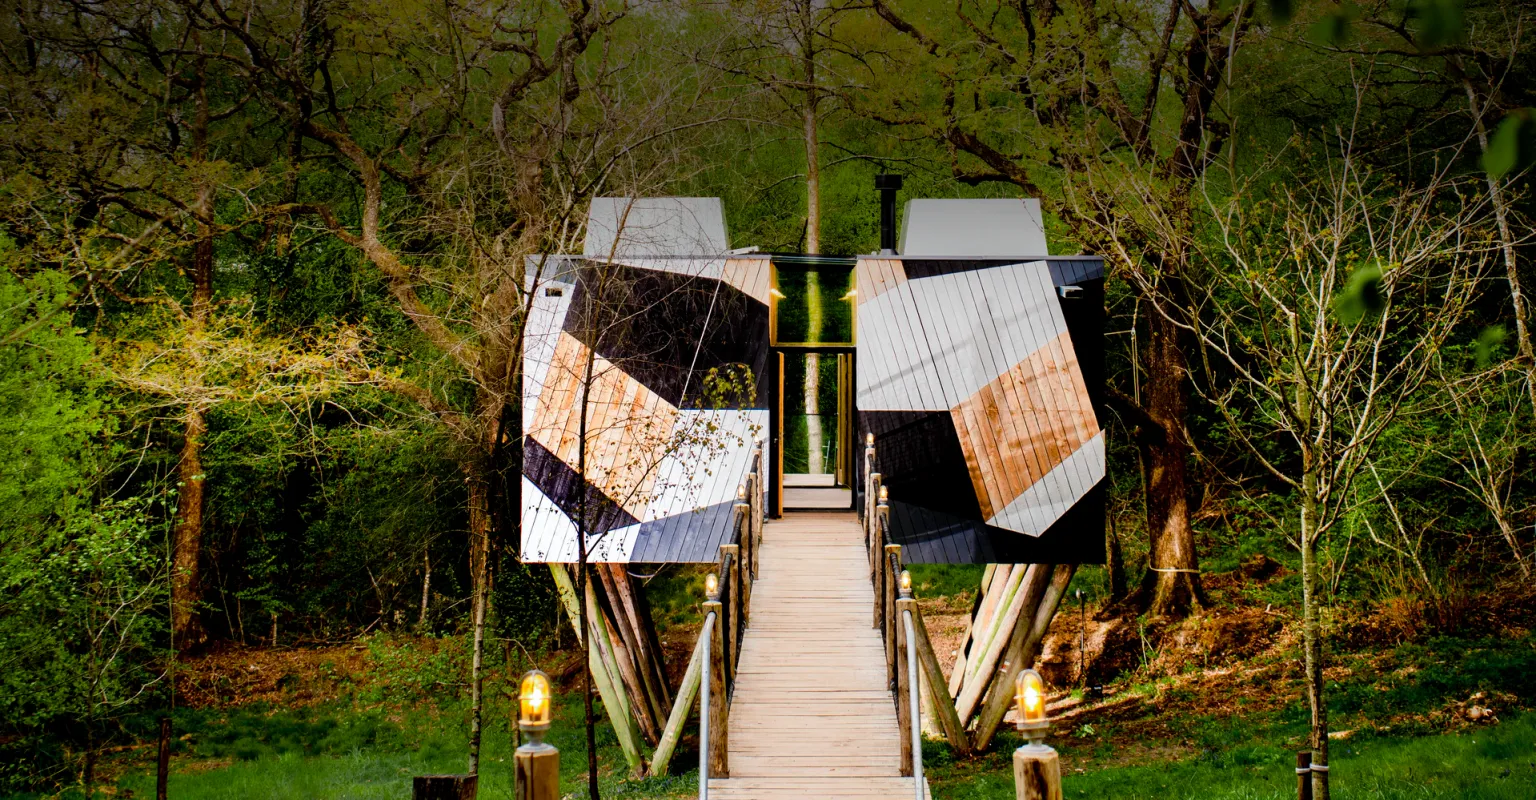 Dazzle Treehouse - Glamping in England